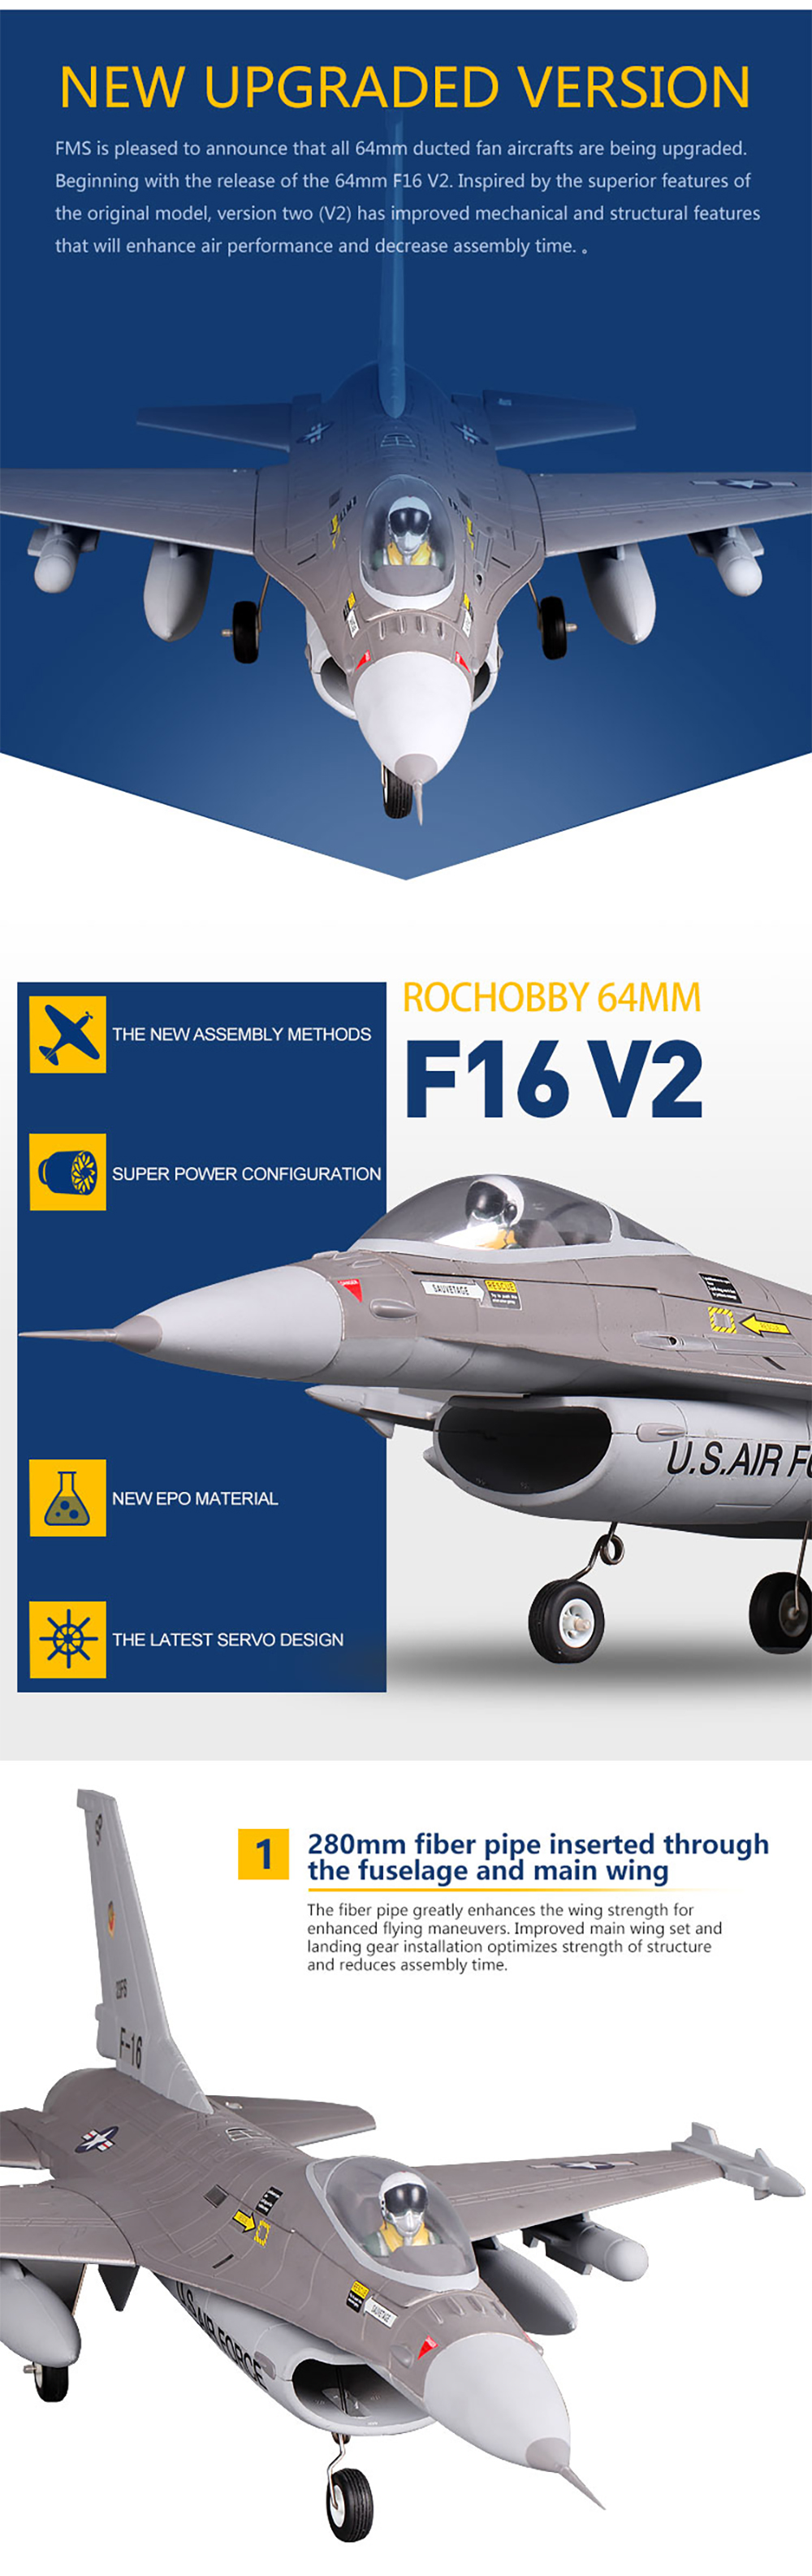 FMS-F-16-Fighting-Falcon-V2-760mm-Wingspan-64mm-11-Blade-Ducted-Fan-Aircrafts-EPO-RC-Airplane-PNP-1773419-3